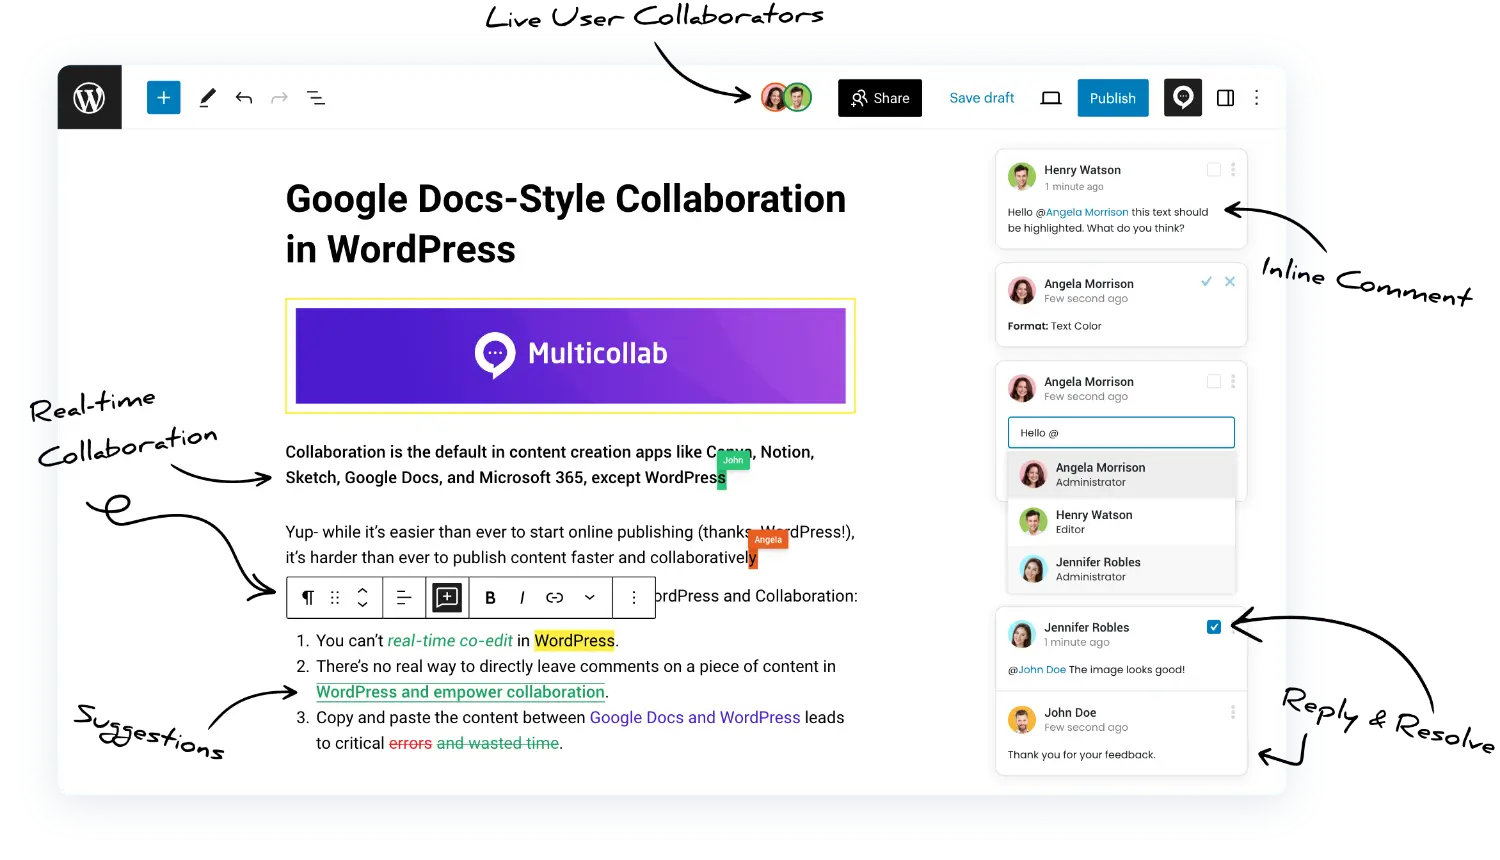 real-time collaboration and suggestions feature in Multicollab dashboard